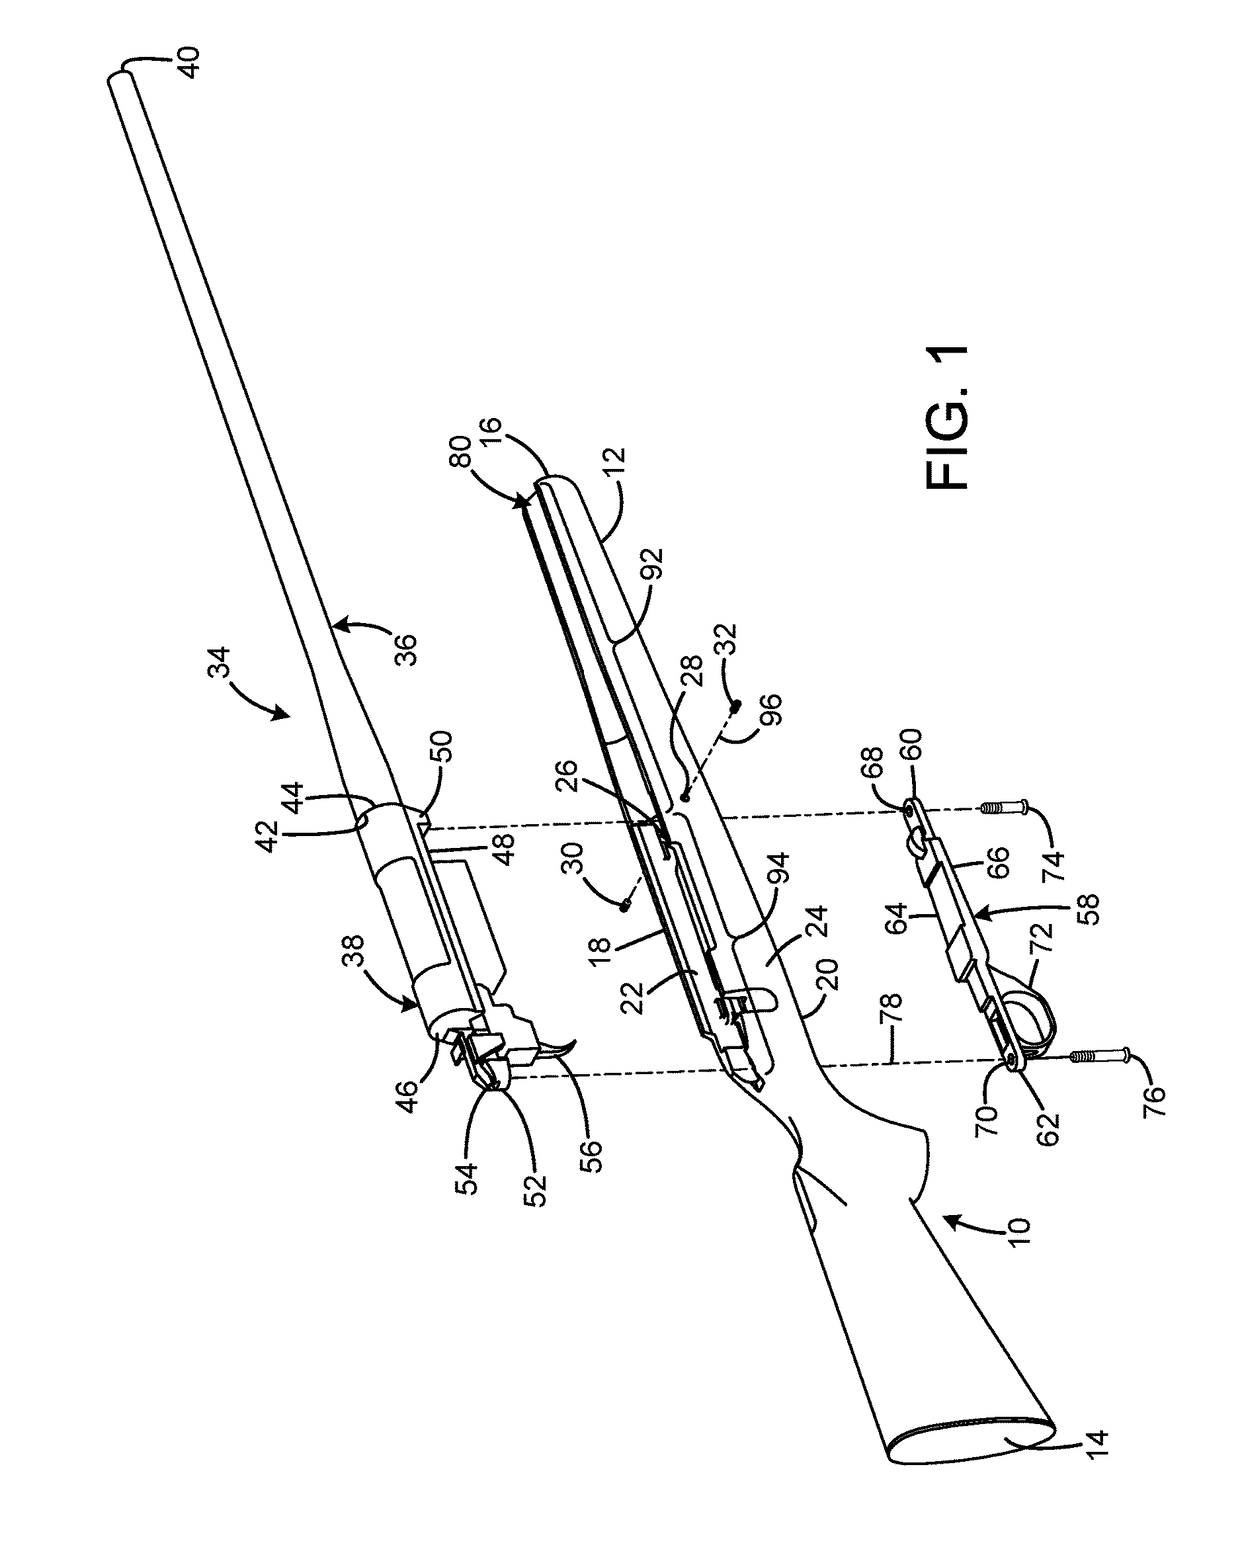 Firearm stock with barrel-centering feature